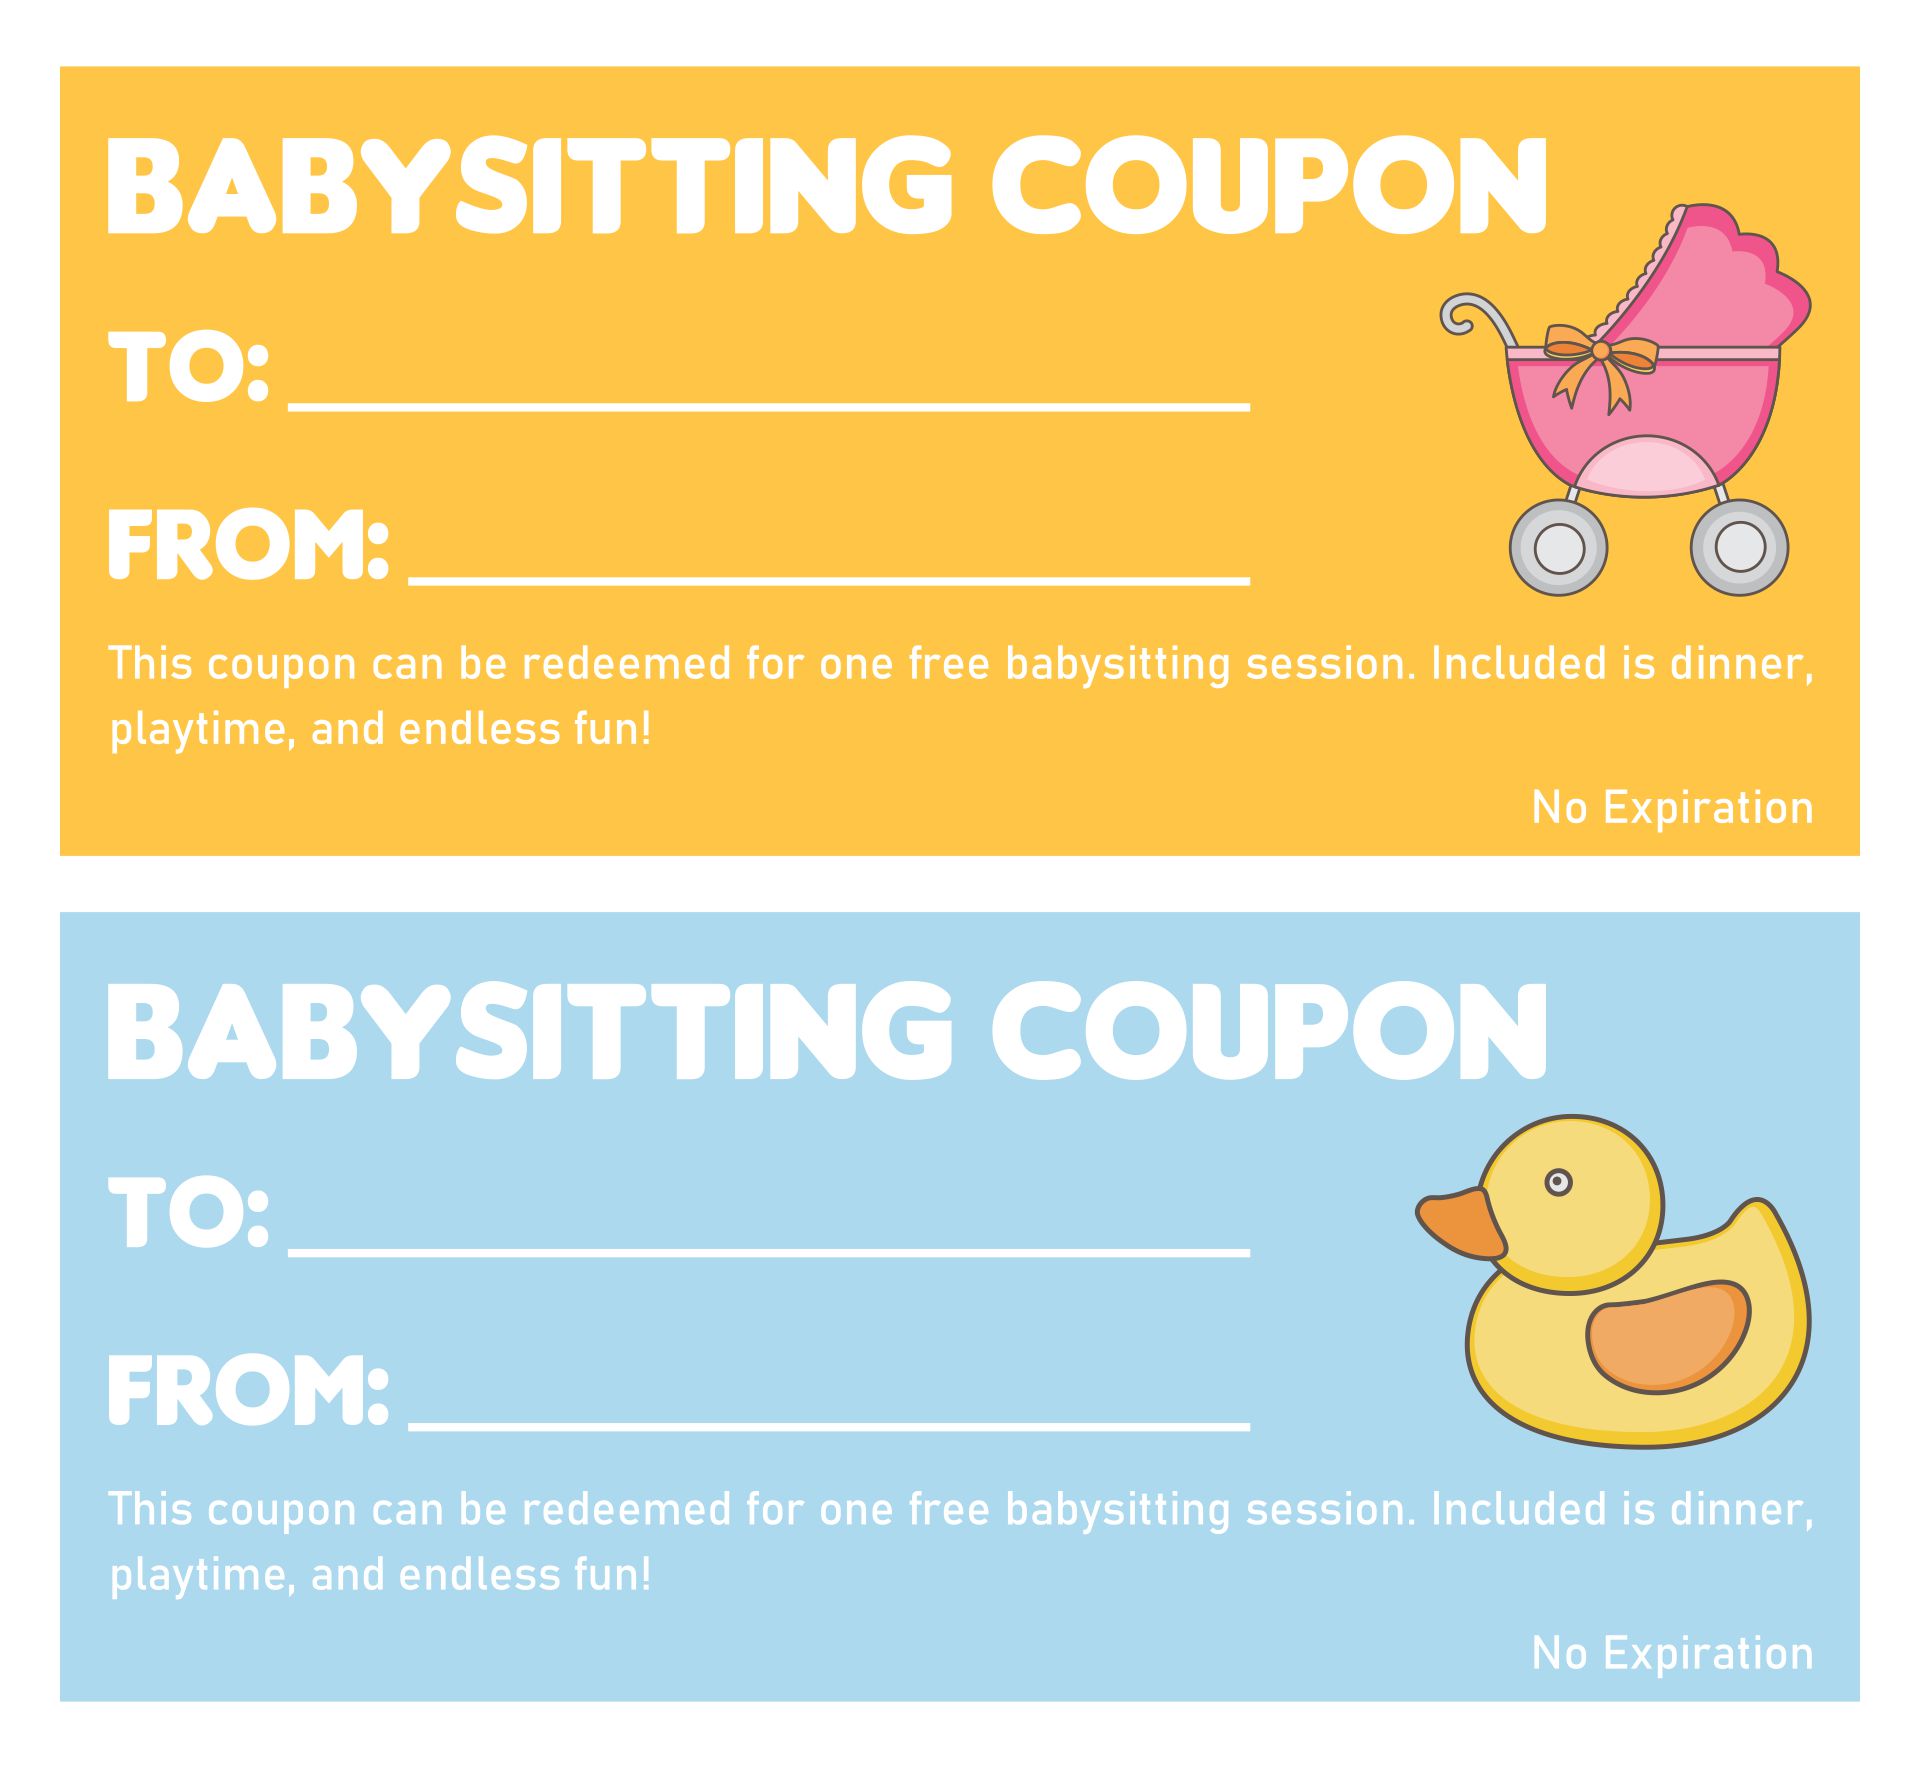 Printable Babysitting Coupon: The Perfect Gift Idea